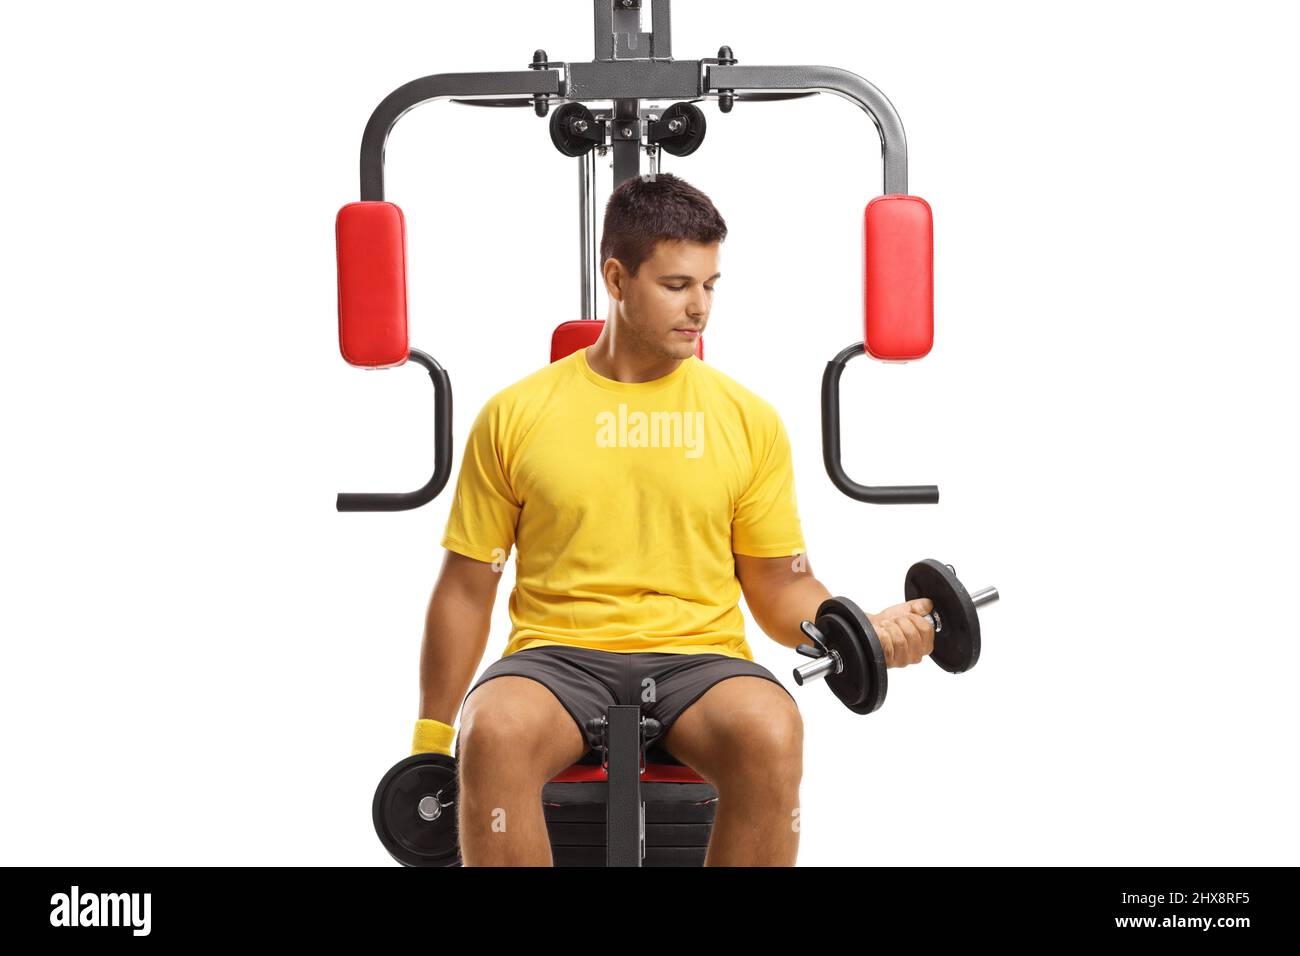 Young man exercising on a fitness machine isolated on white background Stock Photo